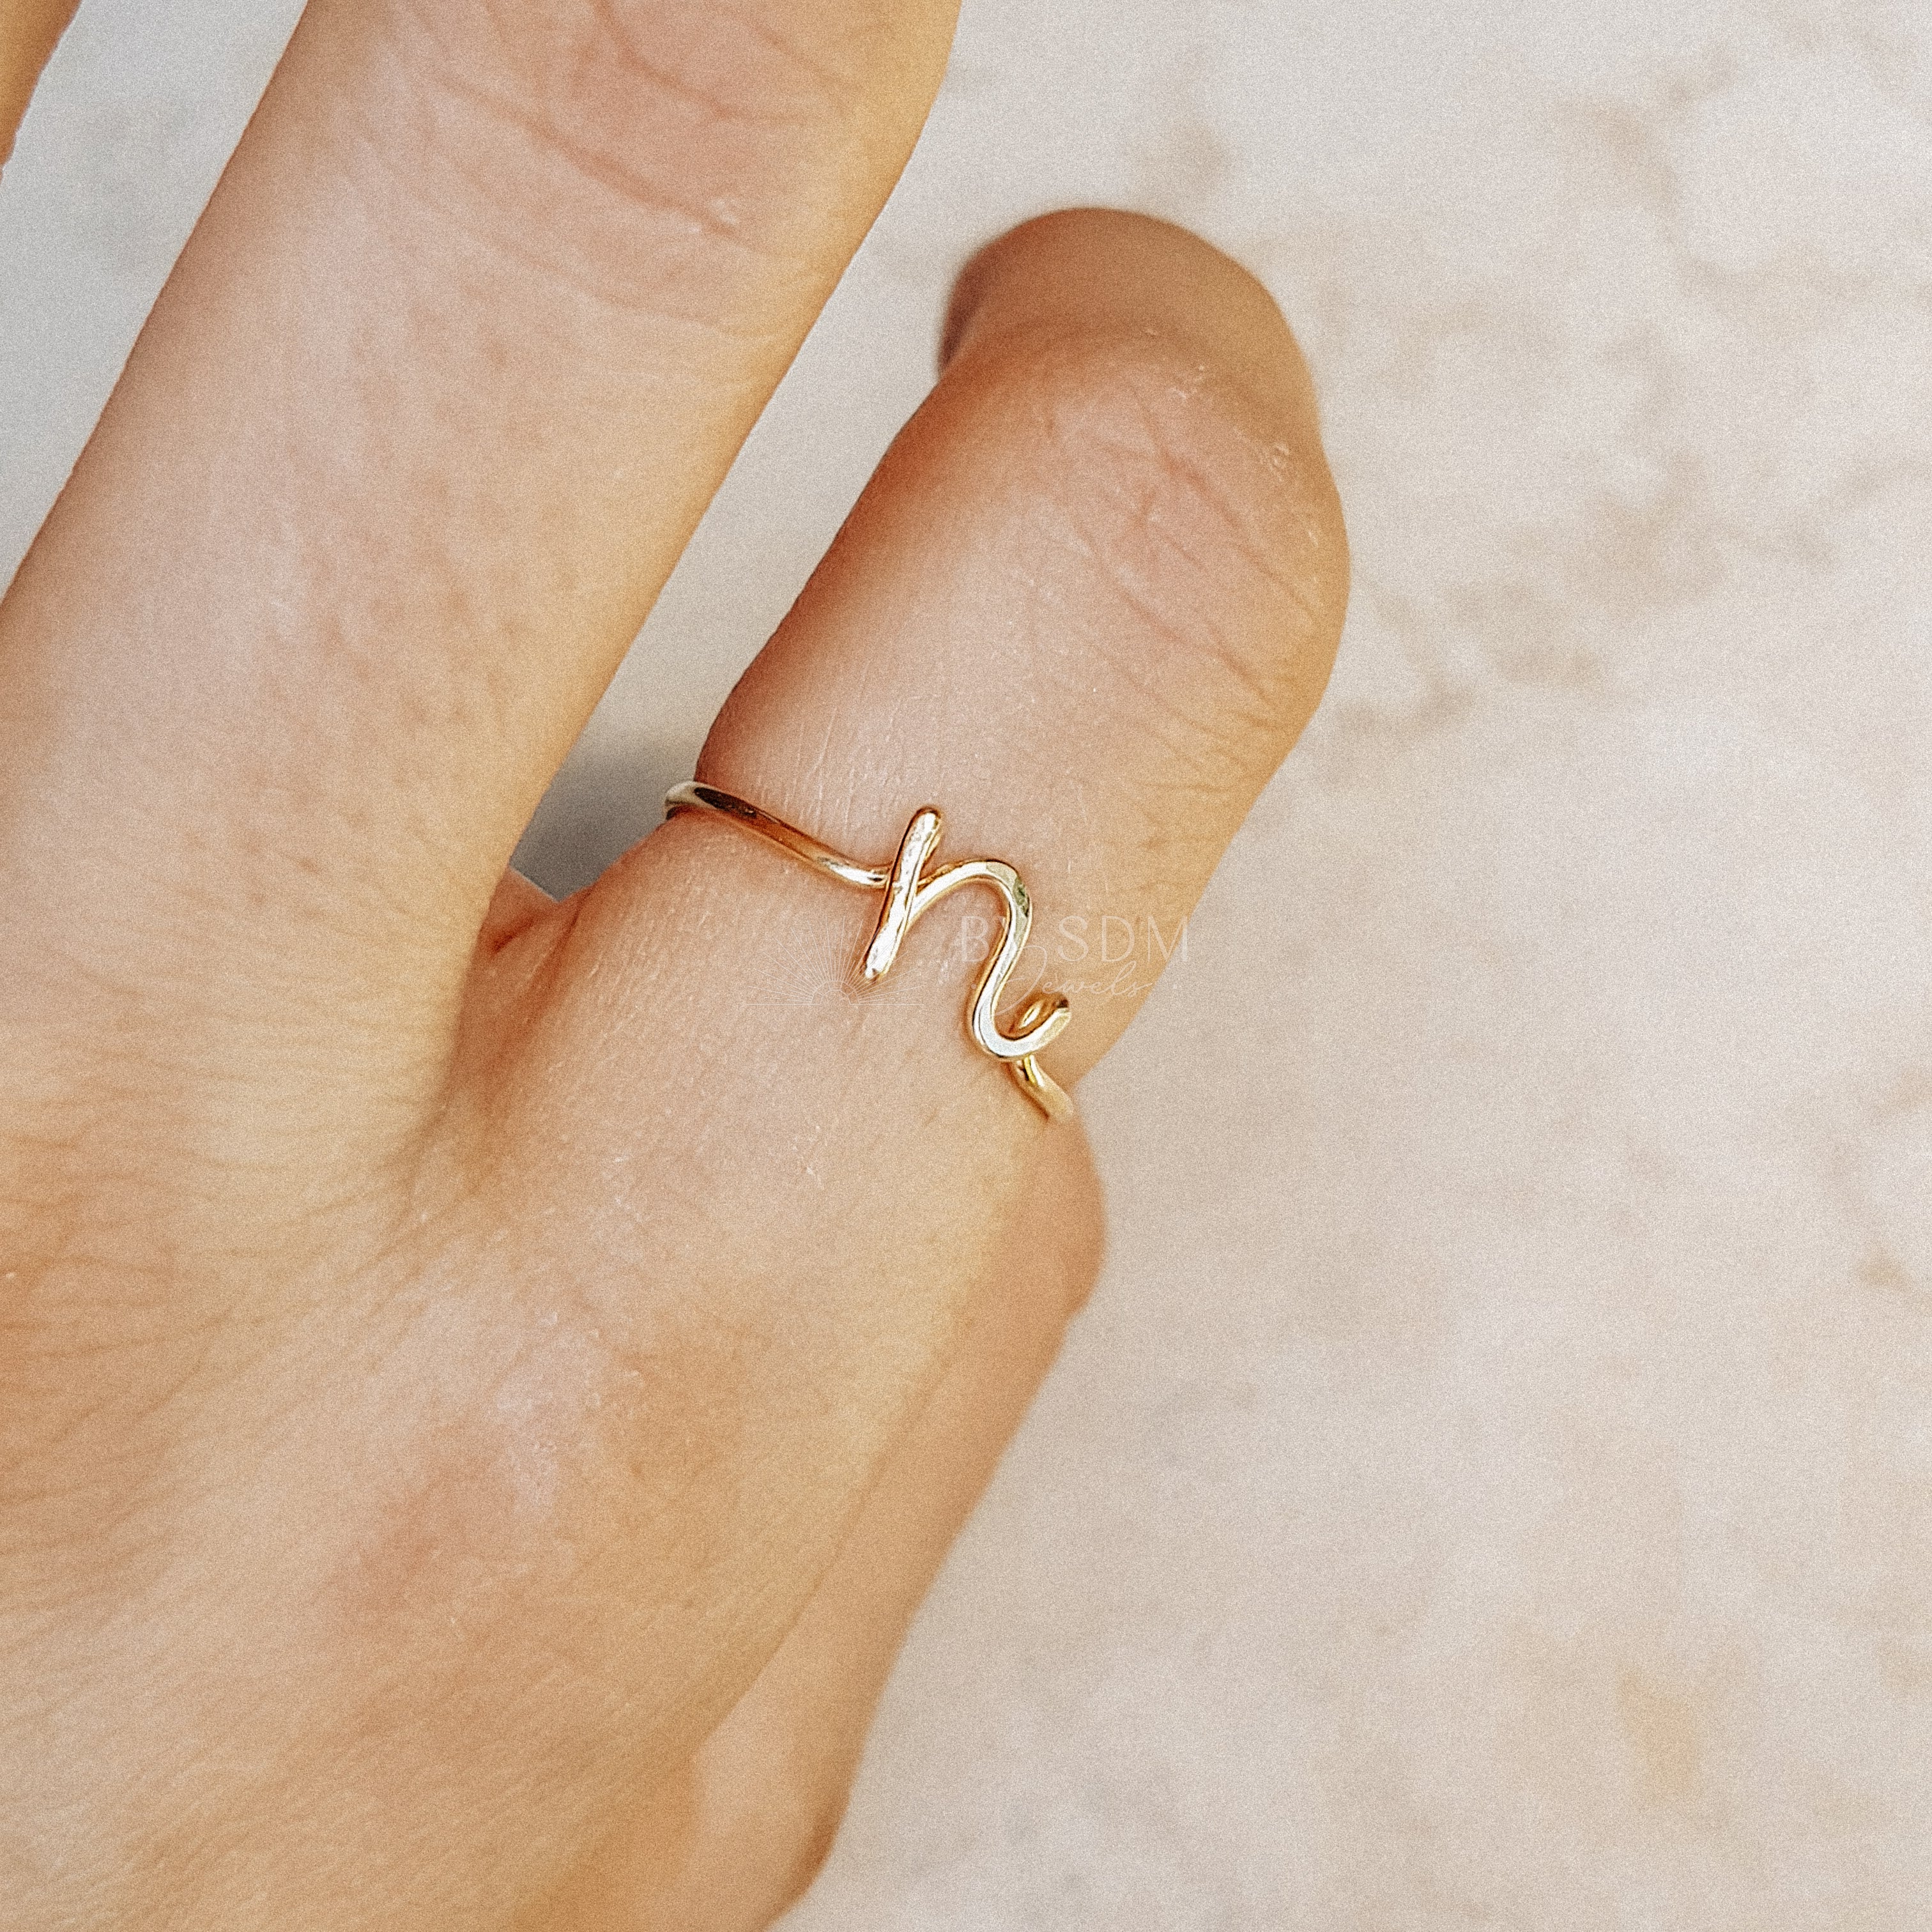 My New Custom Initial Ring: Under $20 & I'm Obsessed – Chasing Chelsea